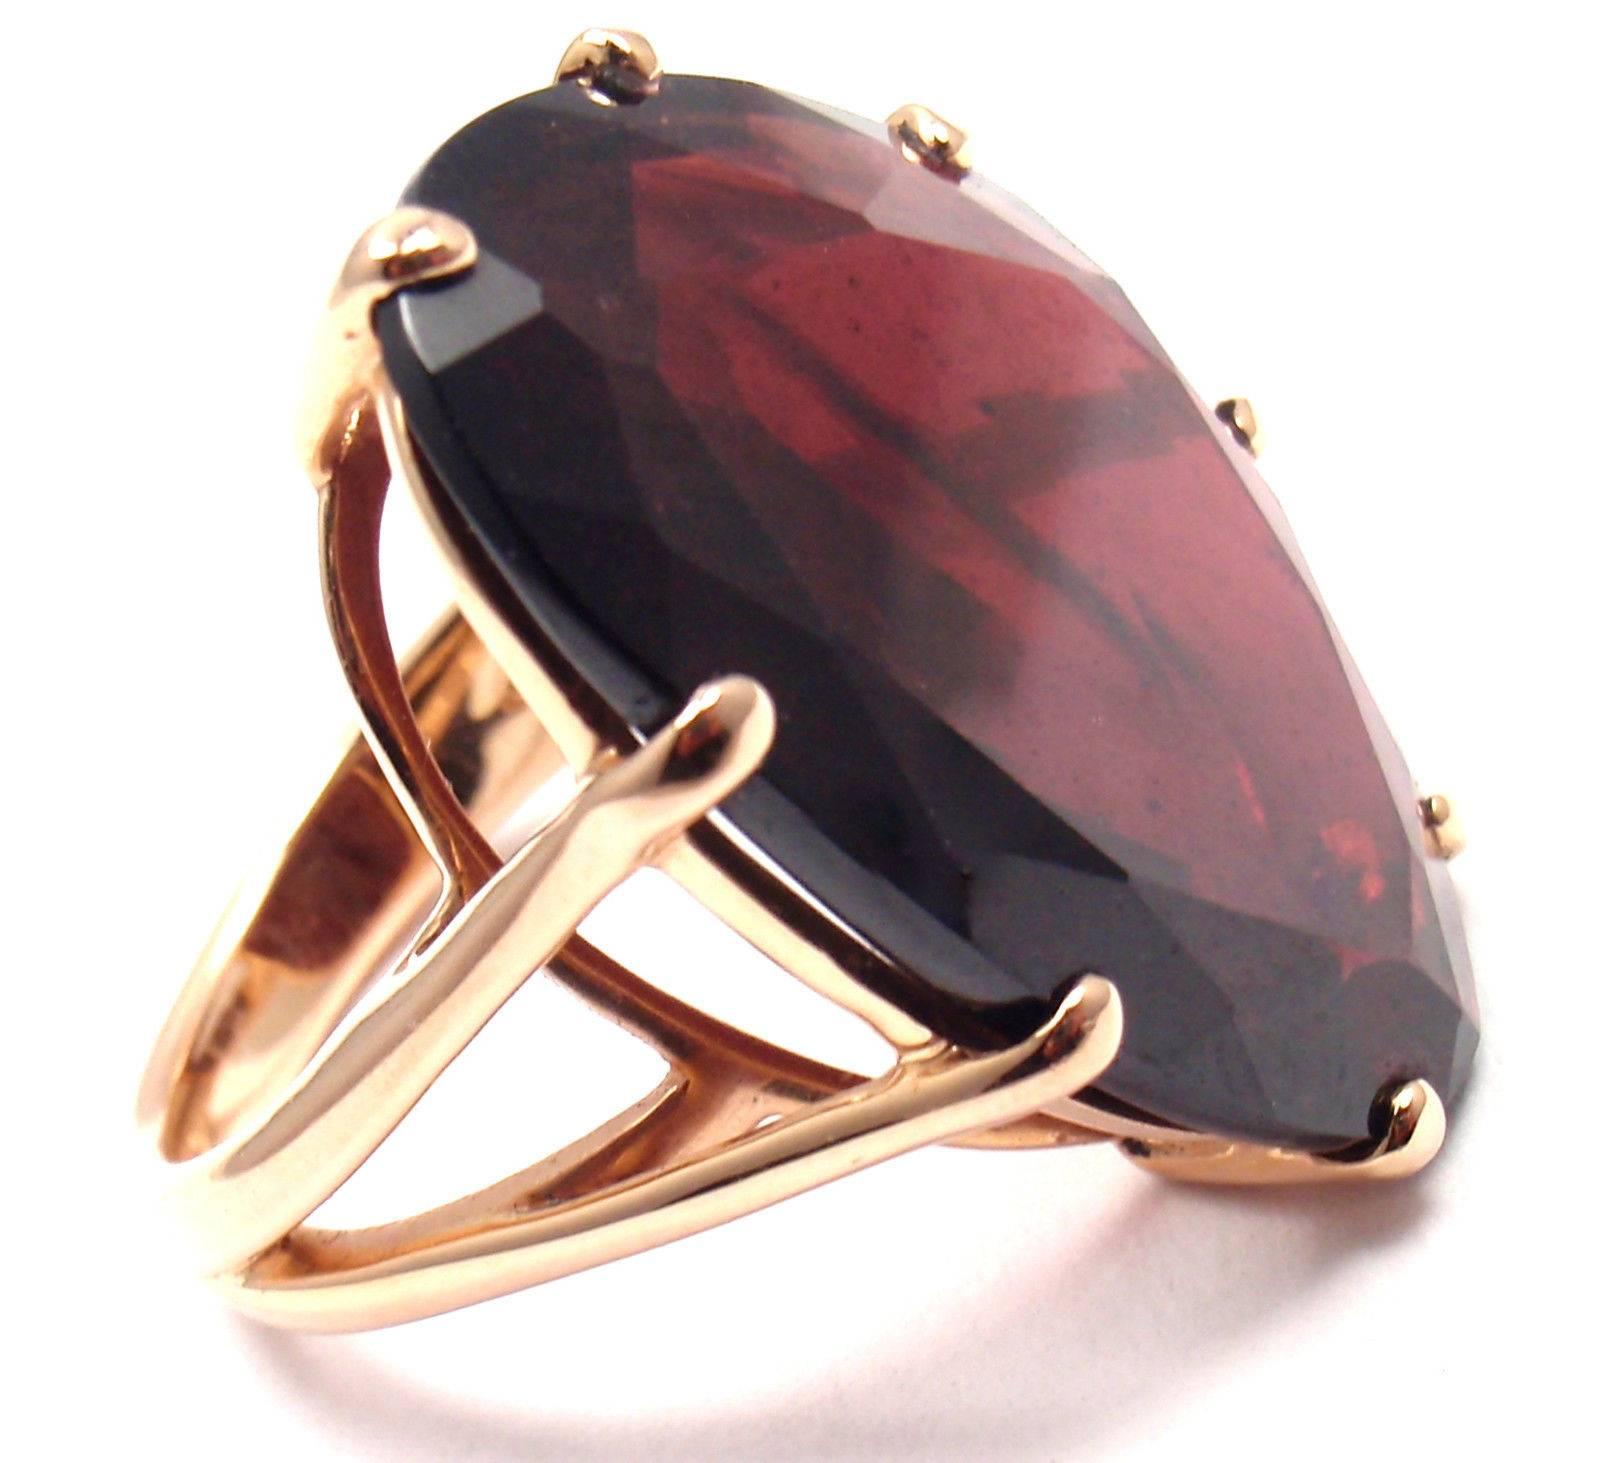 18k Rose Gold Large Garnet Ring by Annoushka. 
With 1 Large Garnet 27mm x 20mm

Details: 
Ring Size: 6.5
Weight: 10.9 grams
Stamped Hallmarks: Annoushka 750 M 6/24
*Free Shipping within the United States*

YOUR PRICE: $2000

T1475eod